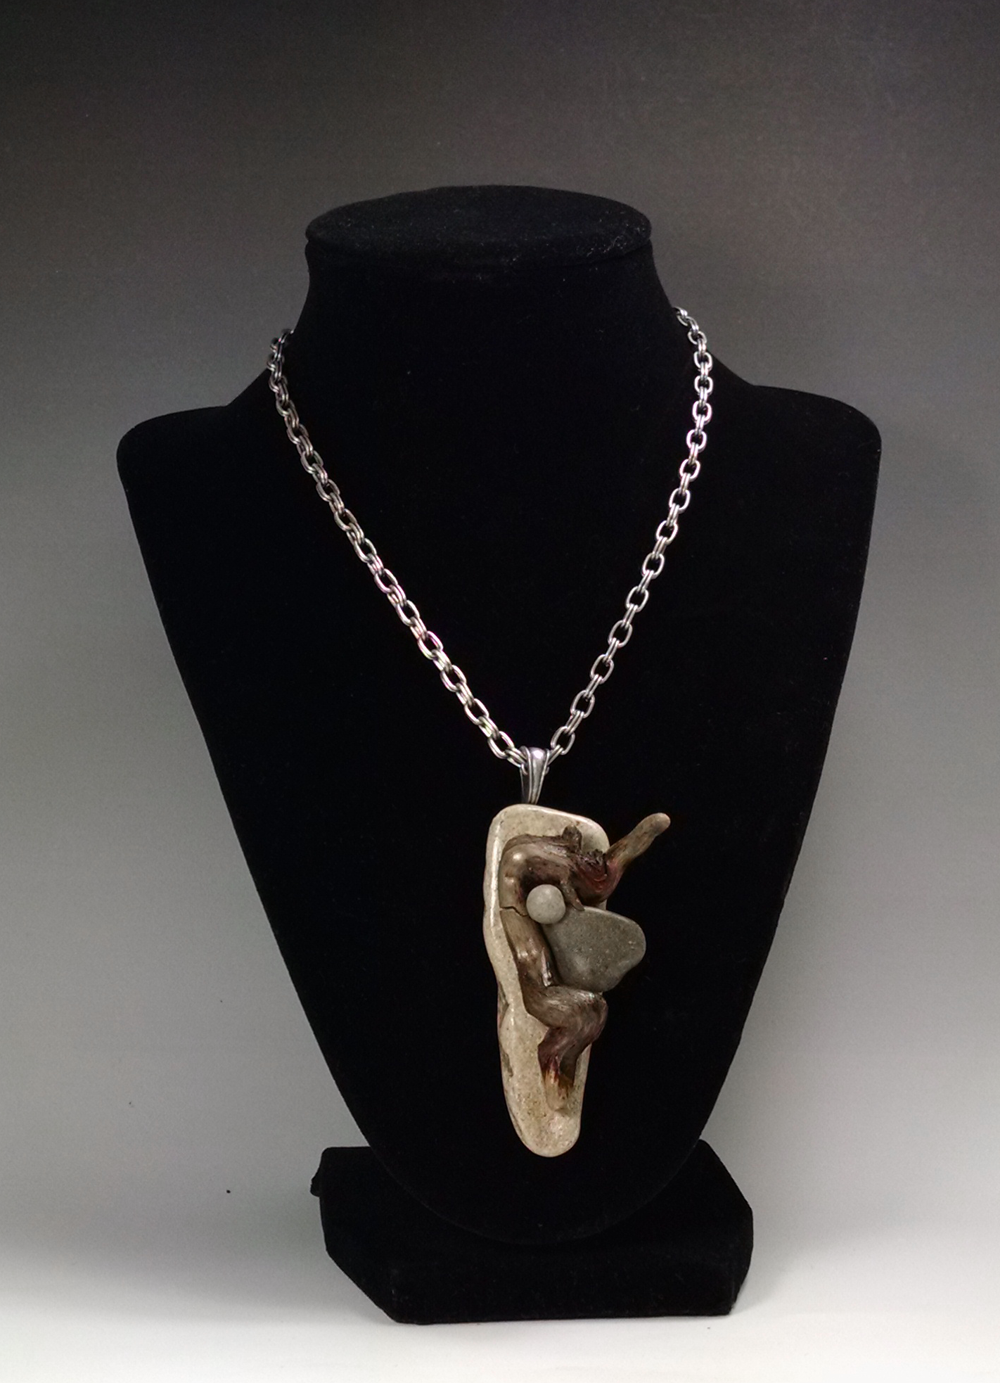 driftwood and beach stone pendant by Deborah Smith, 19 dup for zoa